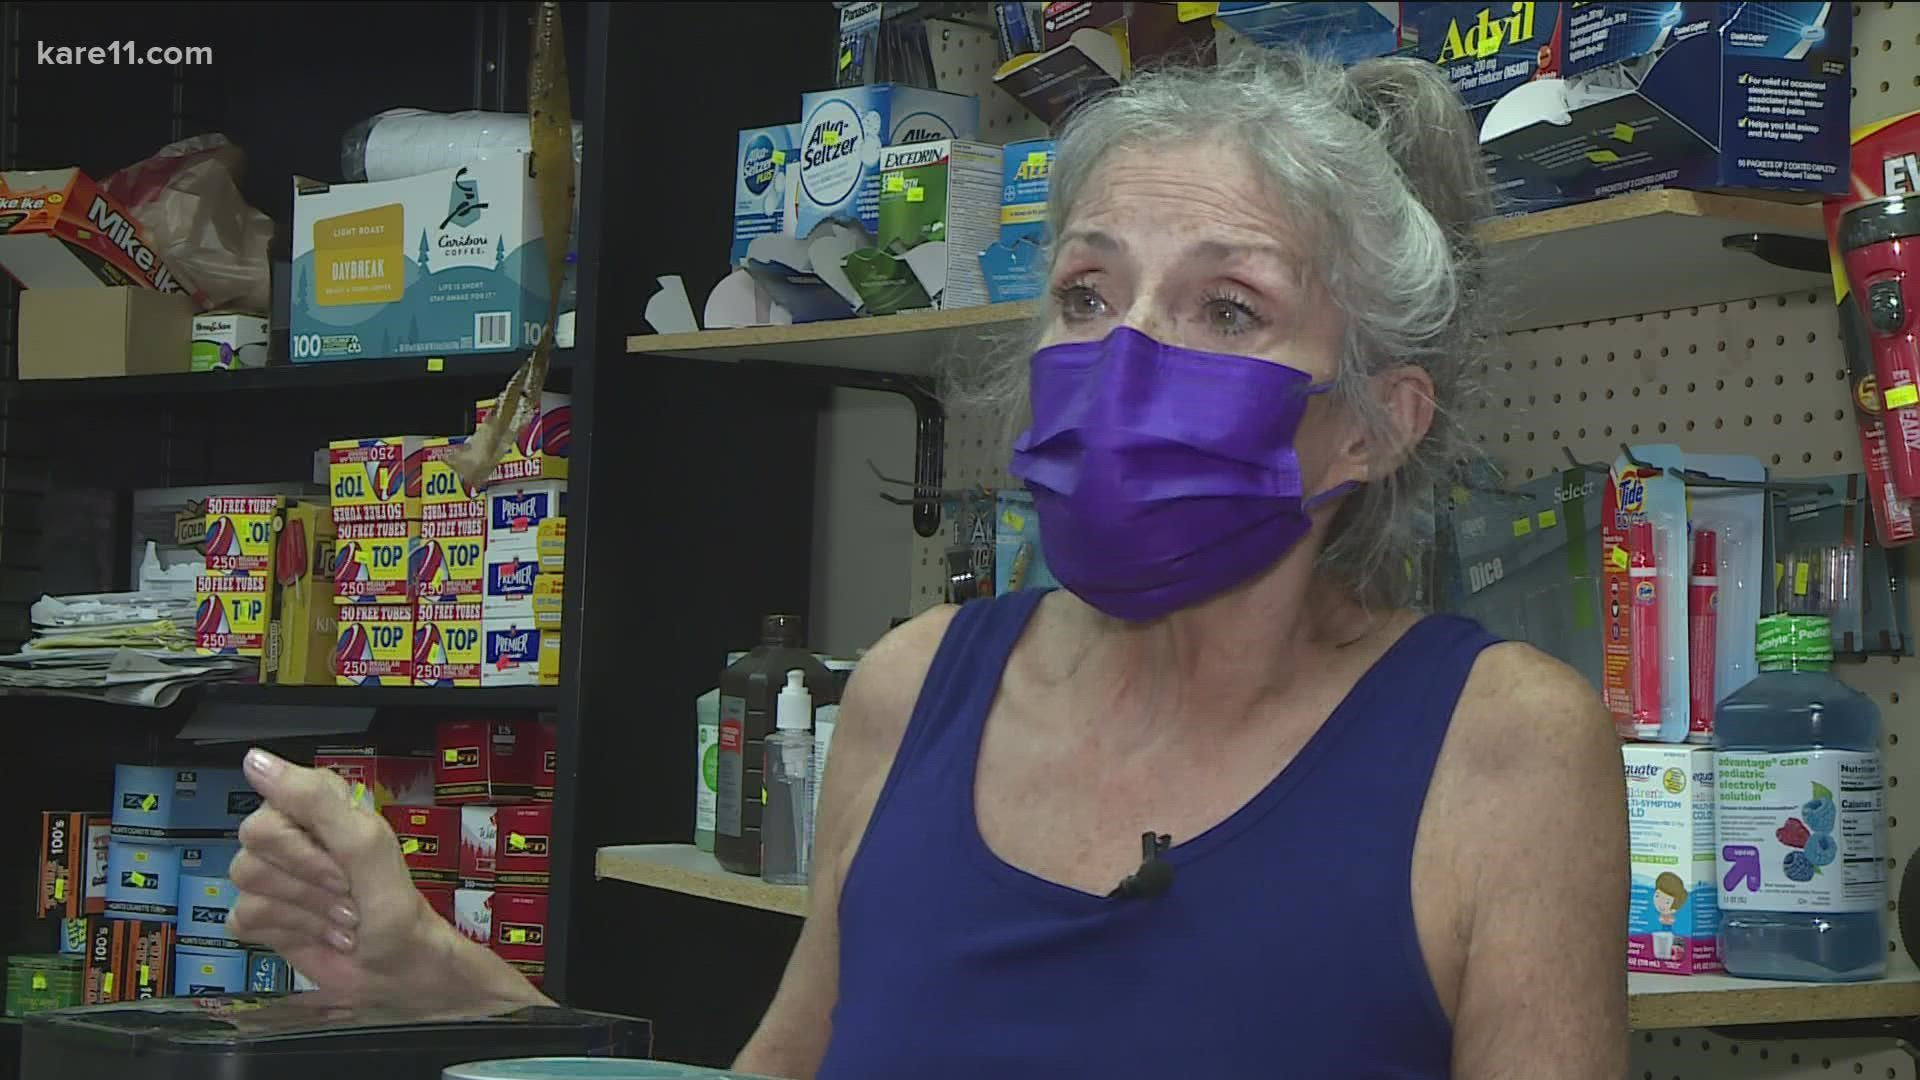 When it comes to requiring customers to wear a mask, those we talked to say that won't be required unless there's a state or federal mandate.